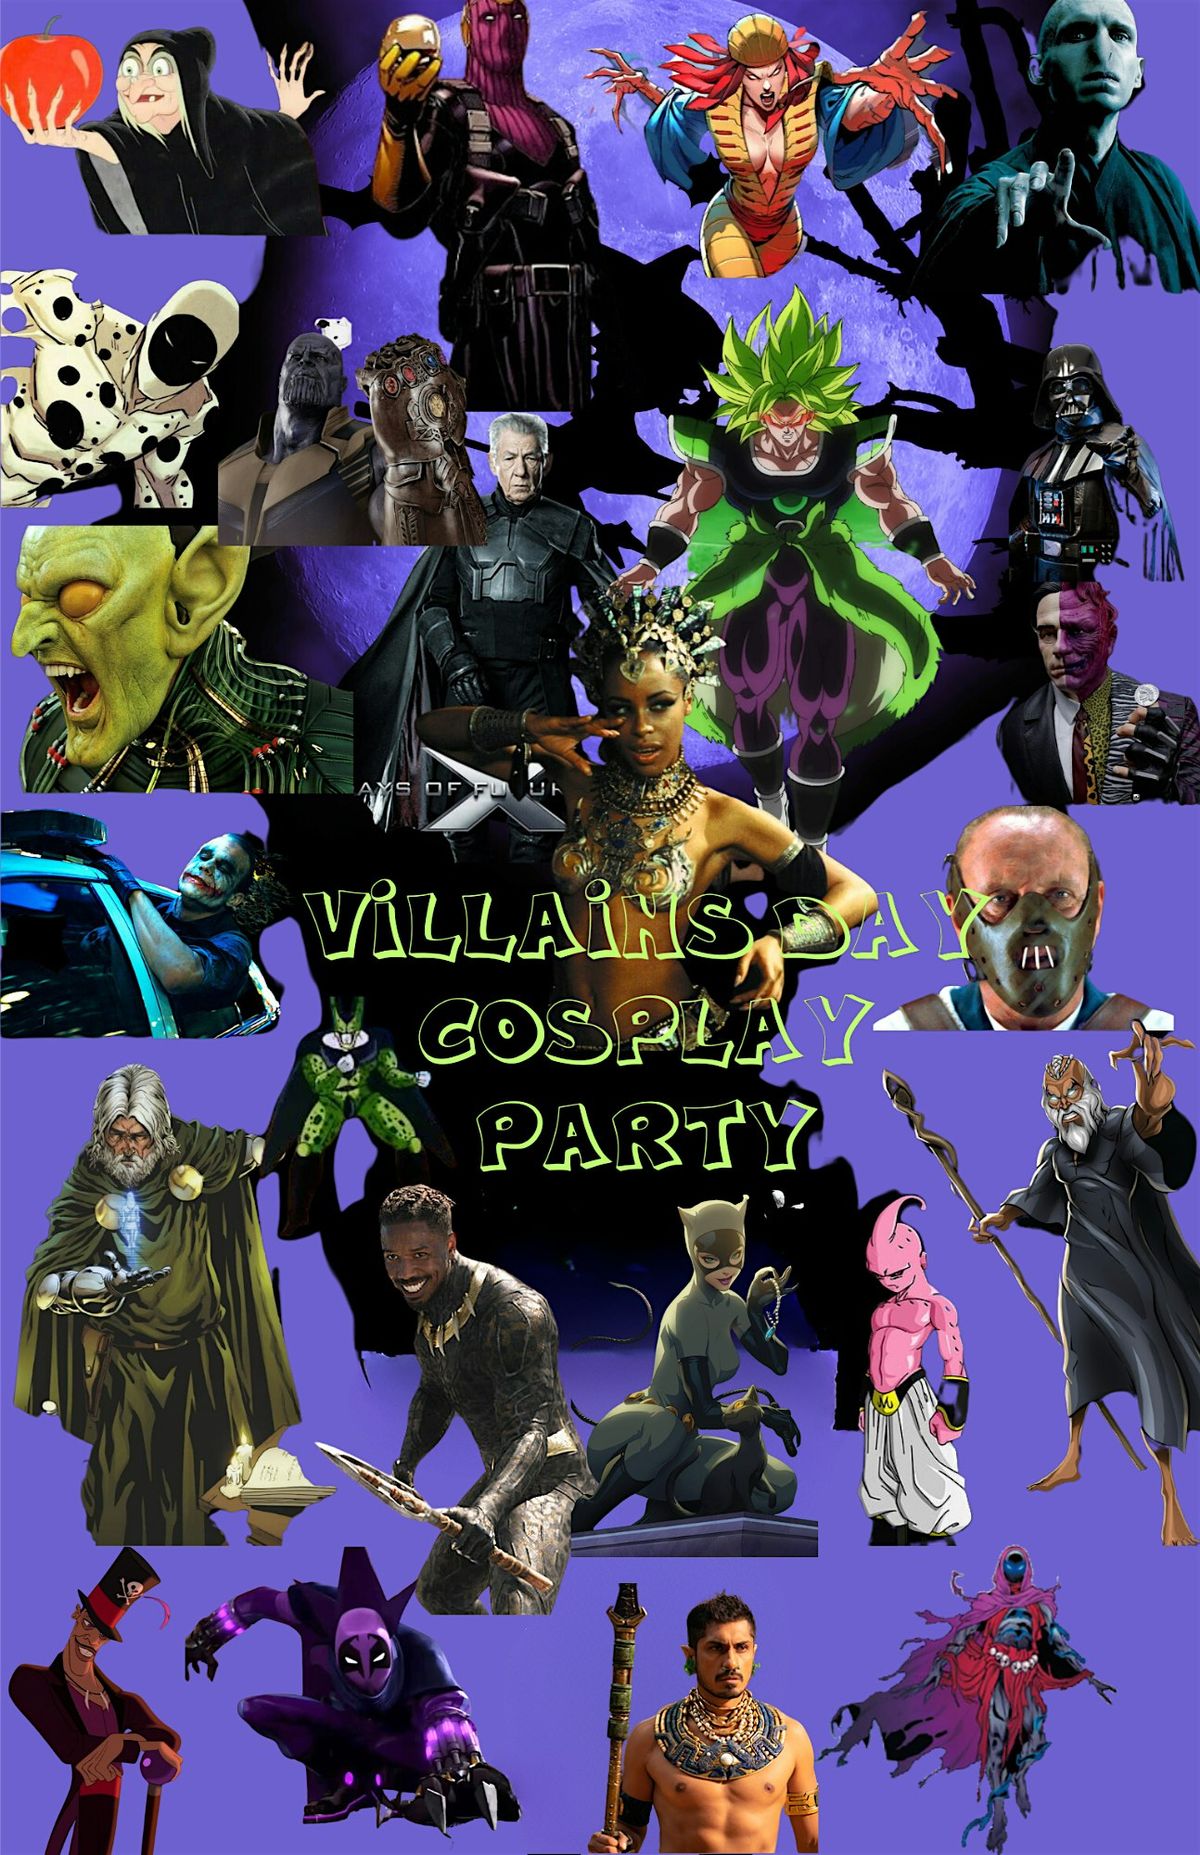 Villlain's Day Cosplay party